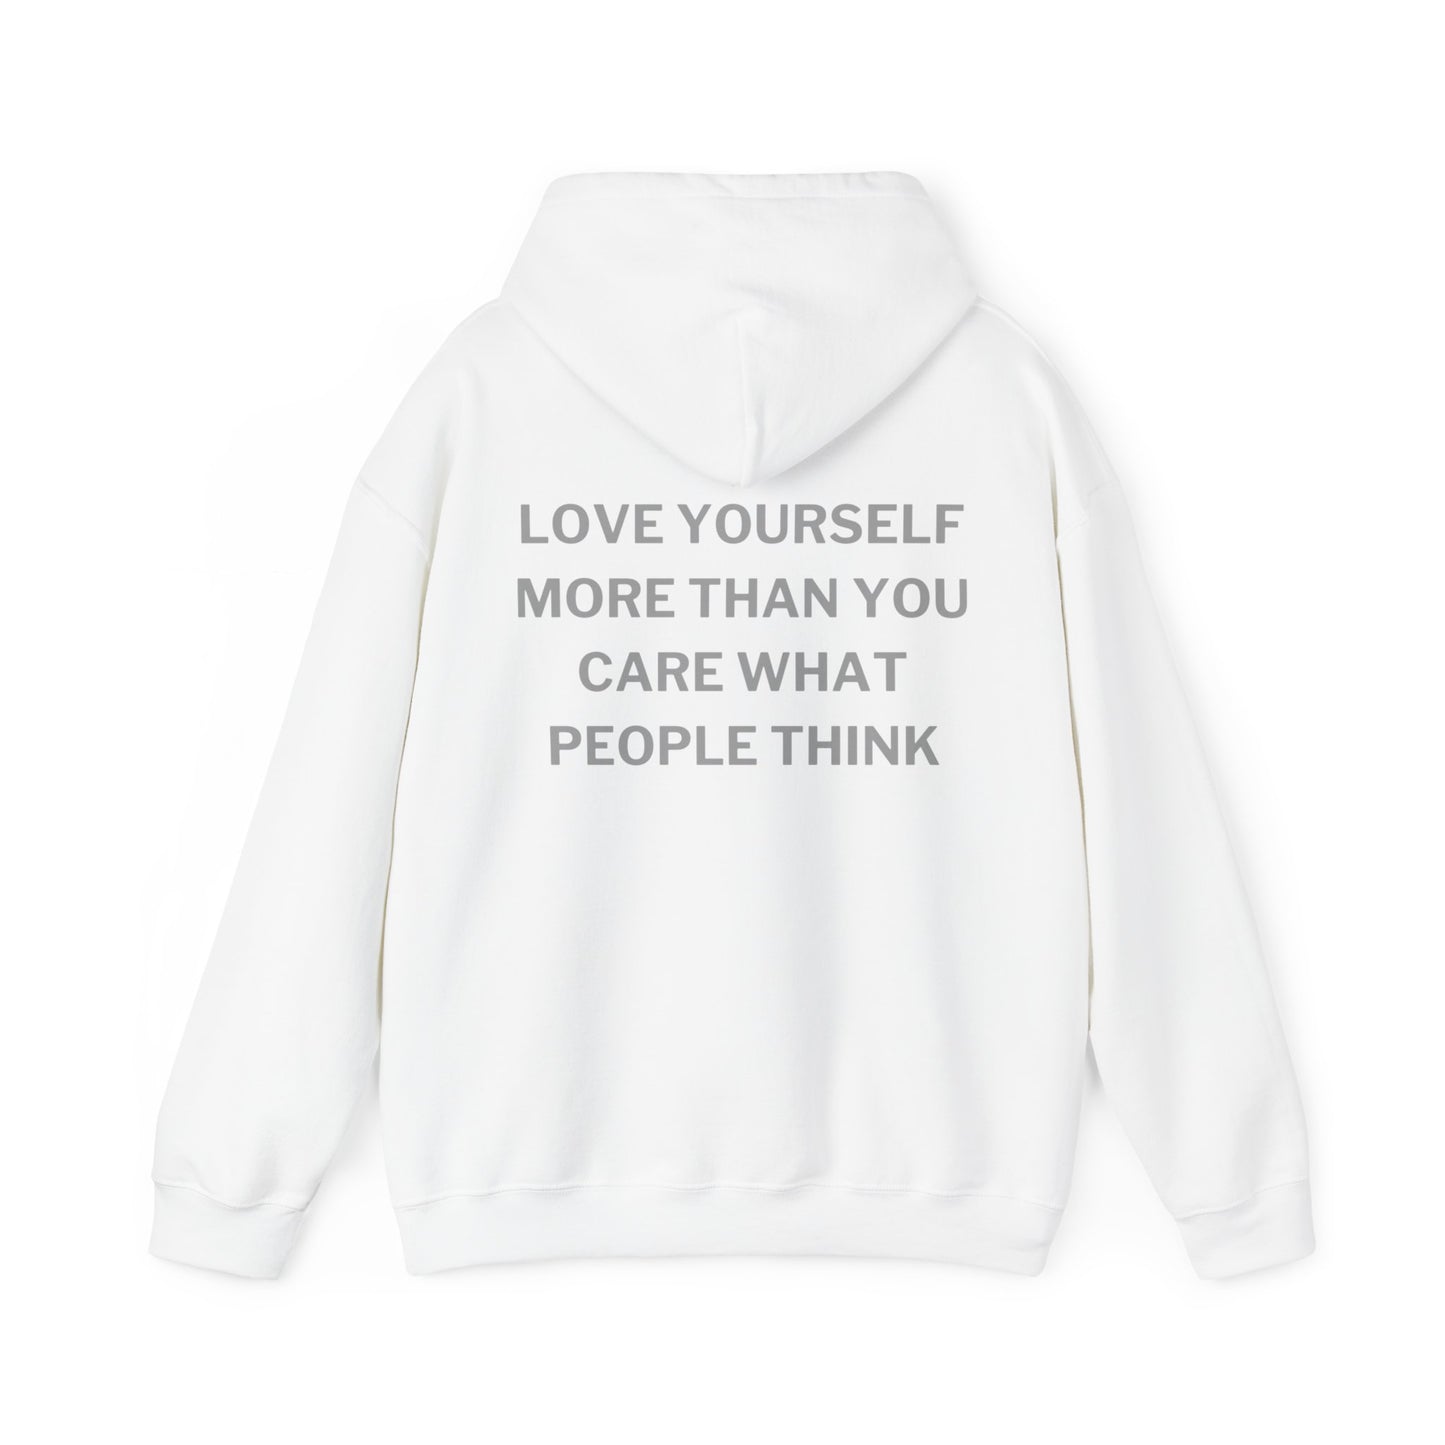 Love Yourself More  - Heavy Blend™ Hooded Sweatshirt - Multi Colors Available